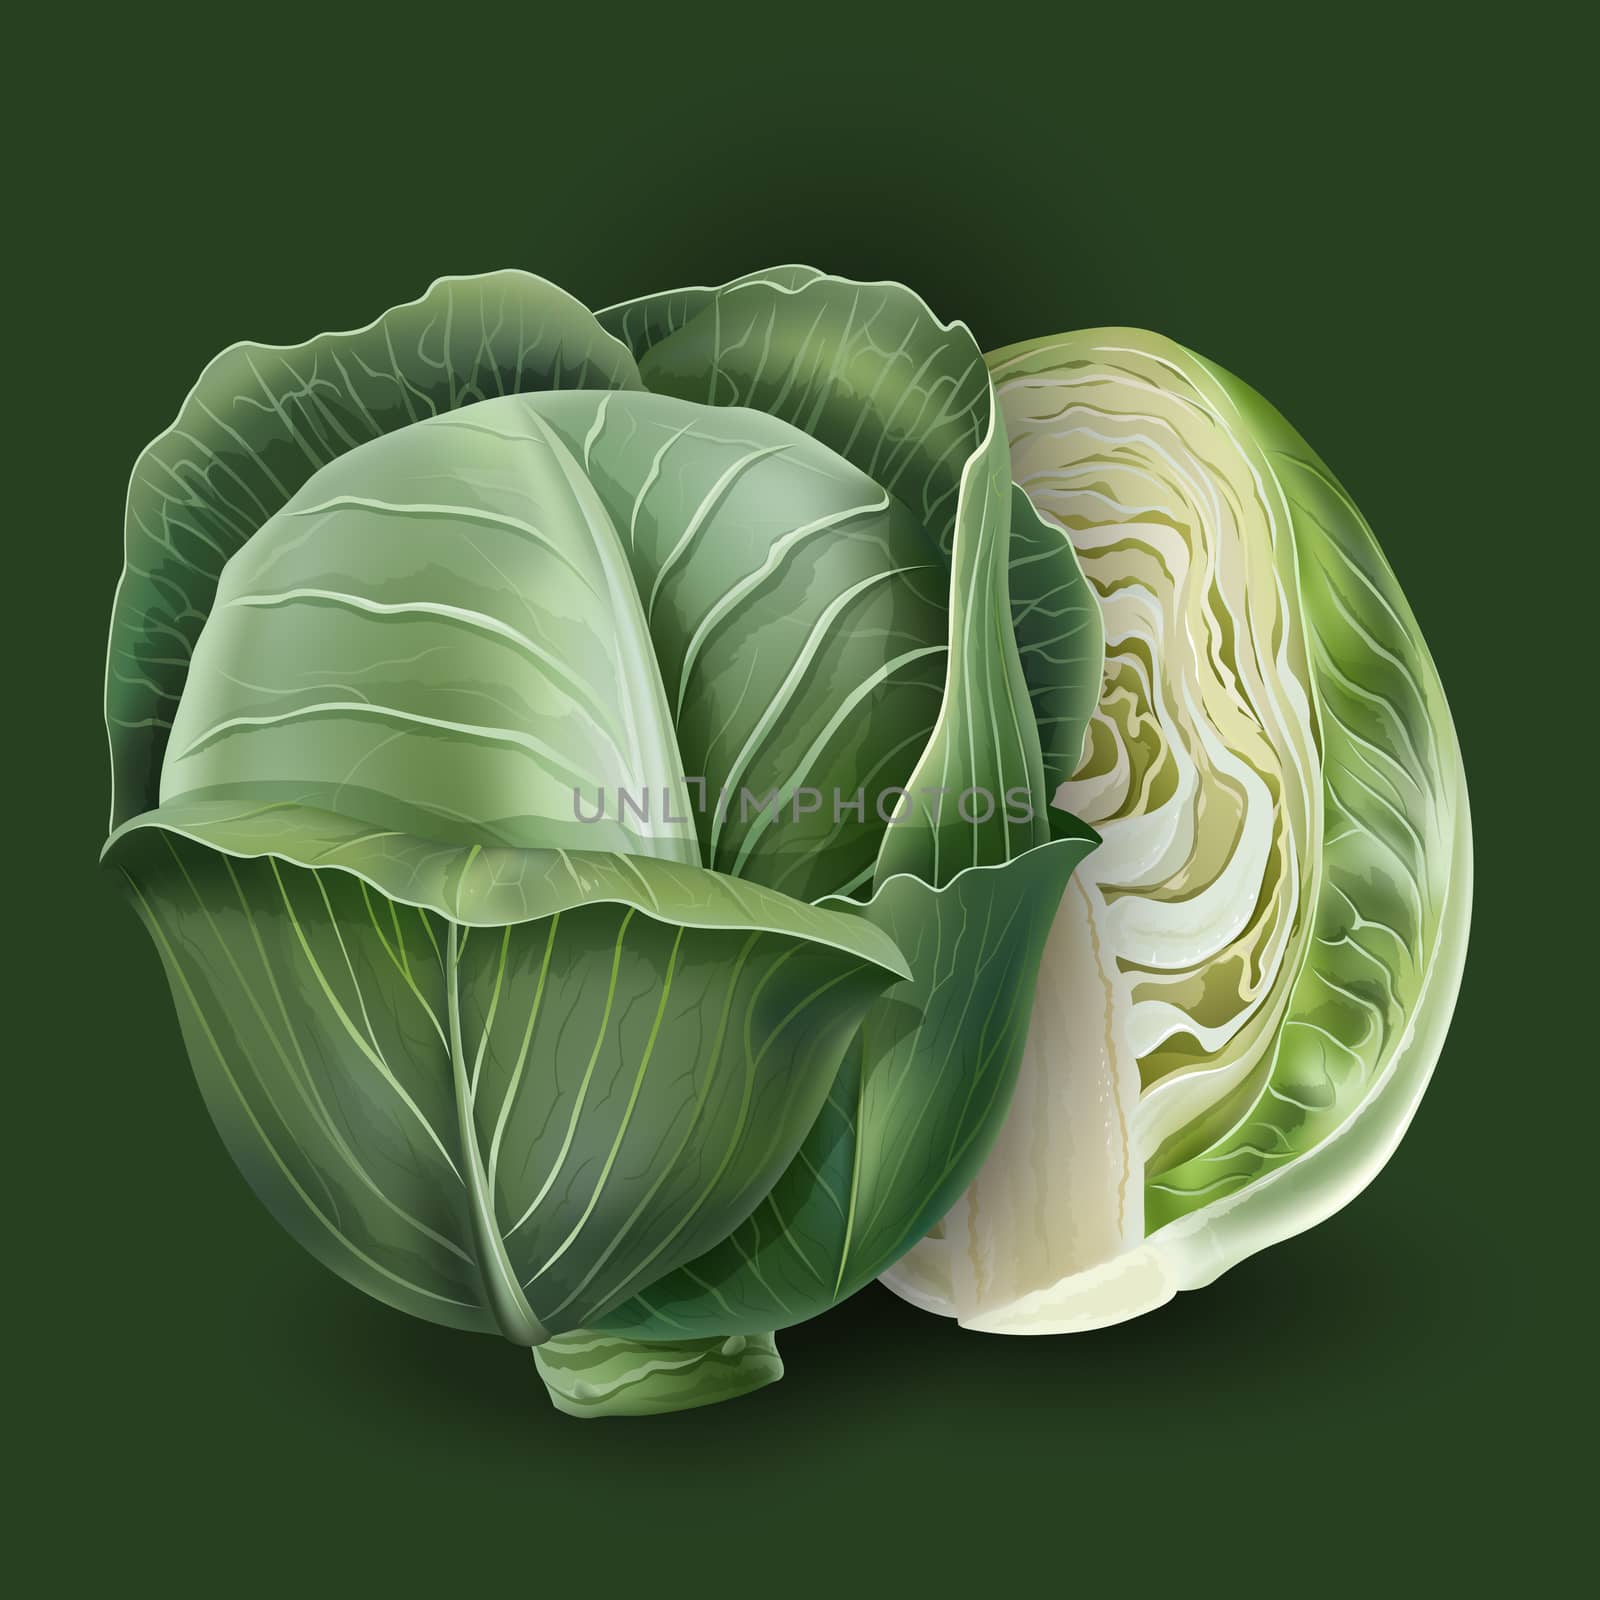 Cabbage on a green background by ConceptCafe